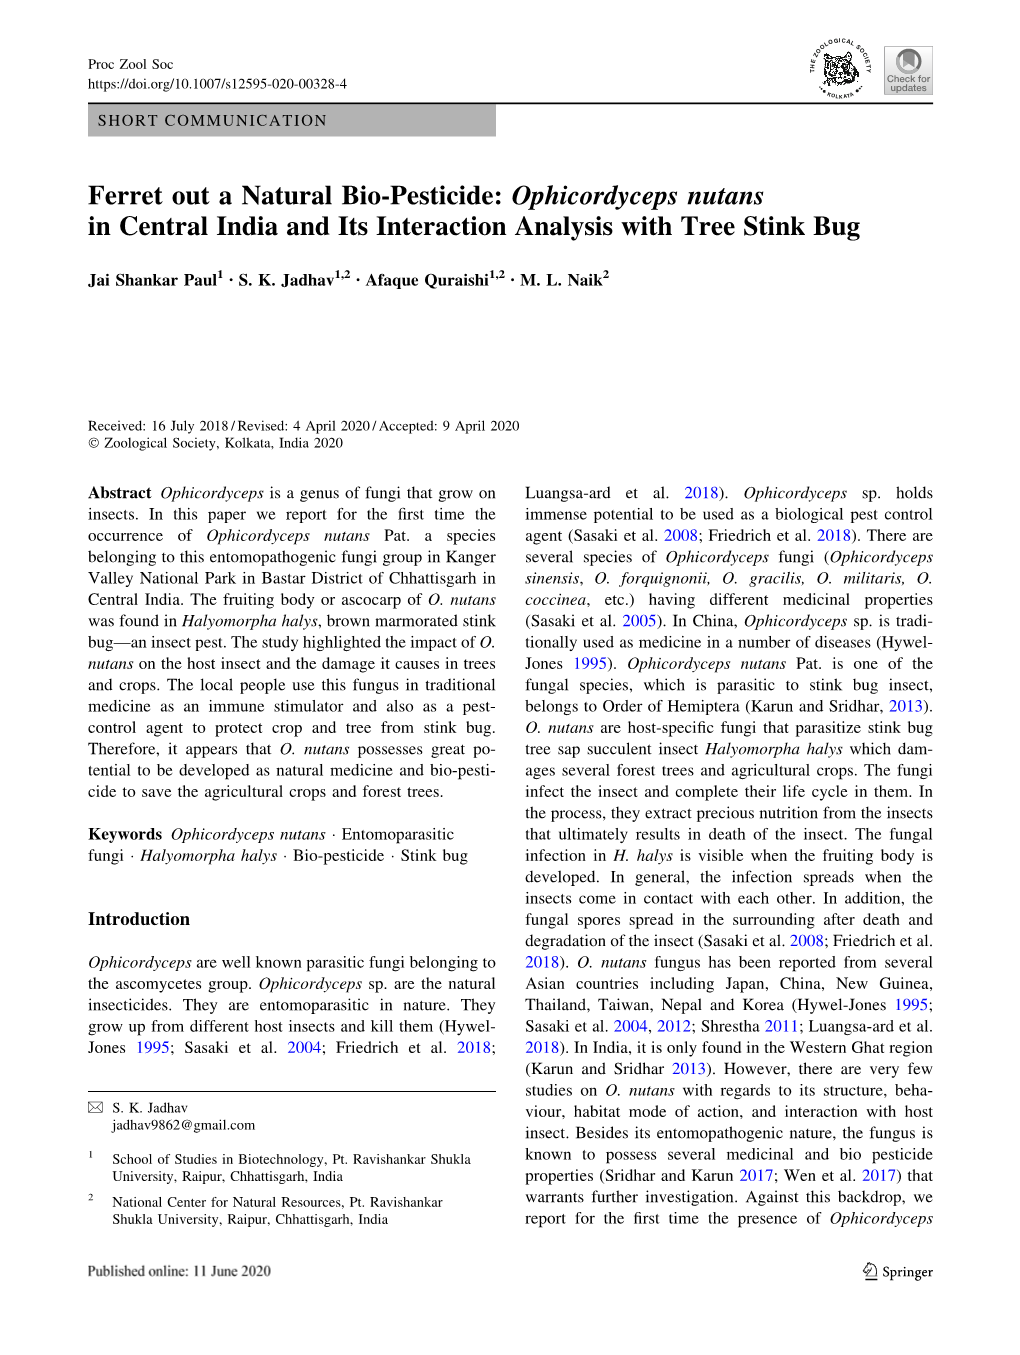 Ferret out a Natural Bio-Pesticide: Ophicordyceps Nutans in Central India and Its Interaction Analysis with Tree Stink Bug